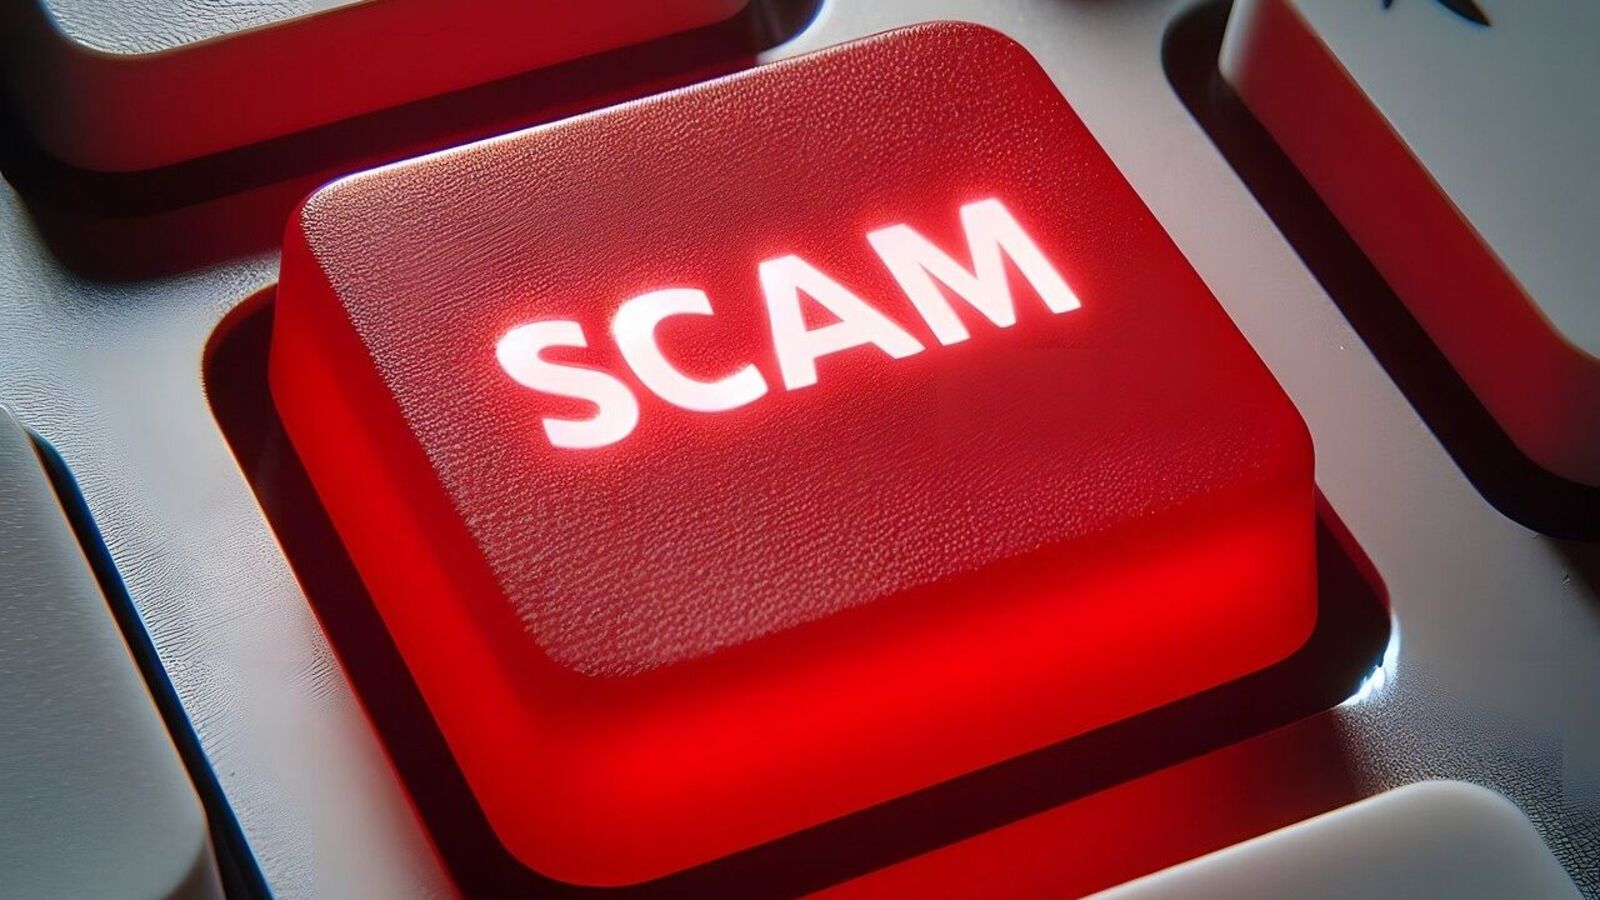 How to stay protected from pig butchering financial scams? Here are 7 key steps